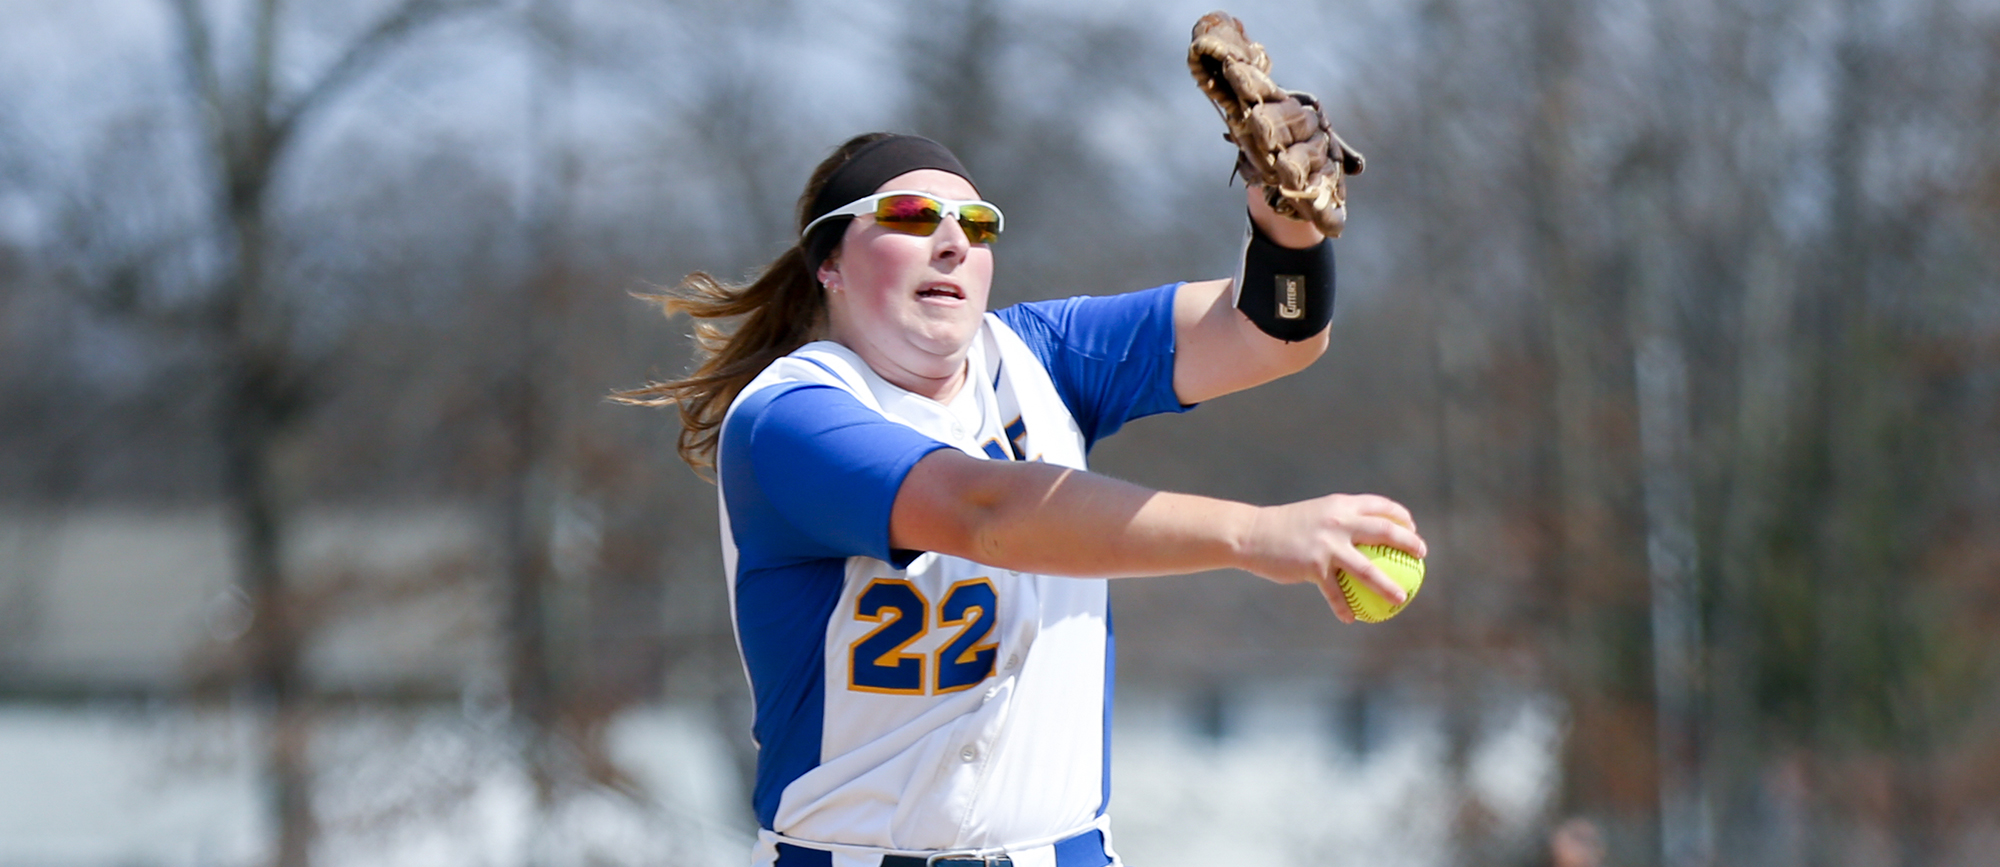 Aimee Kistner struck out 7 batters over 7 shutout innings and drove in the game-winning run in Western New England's 1-0 victory over Nichols on Wednesday. (Photo by Chris Marion)